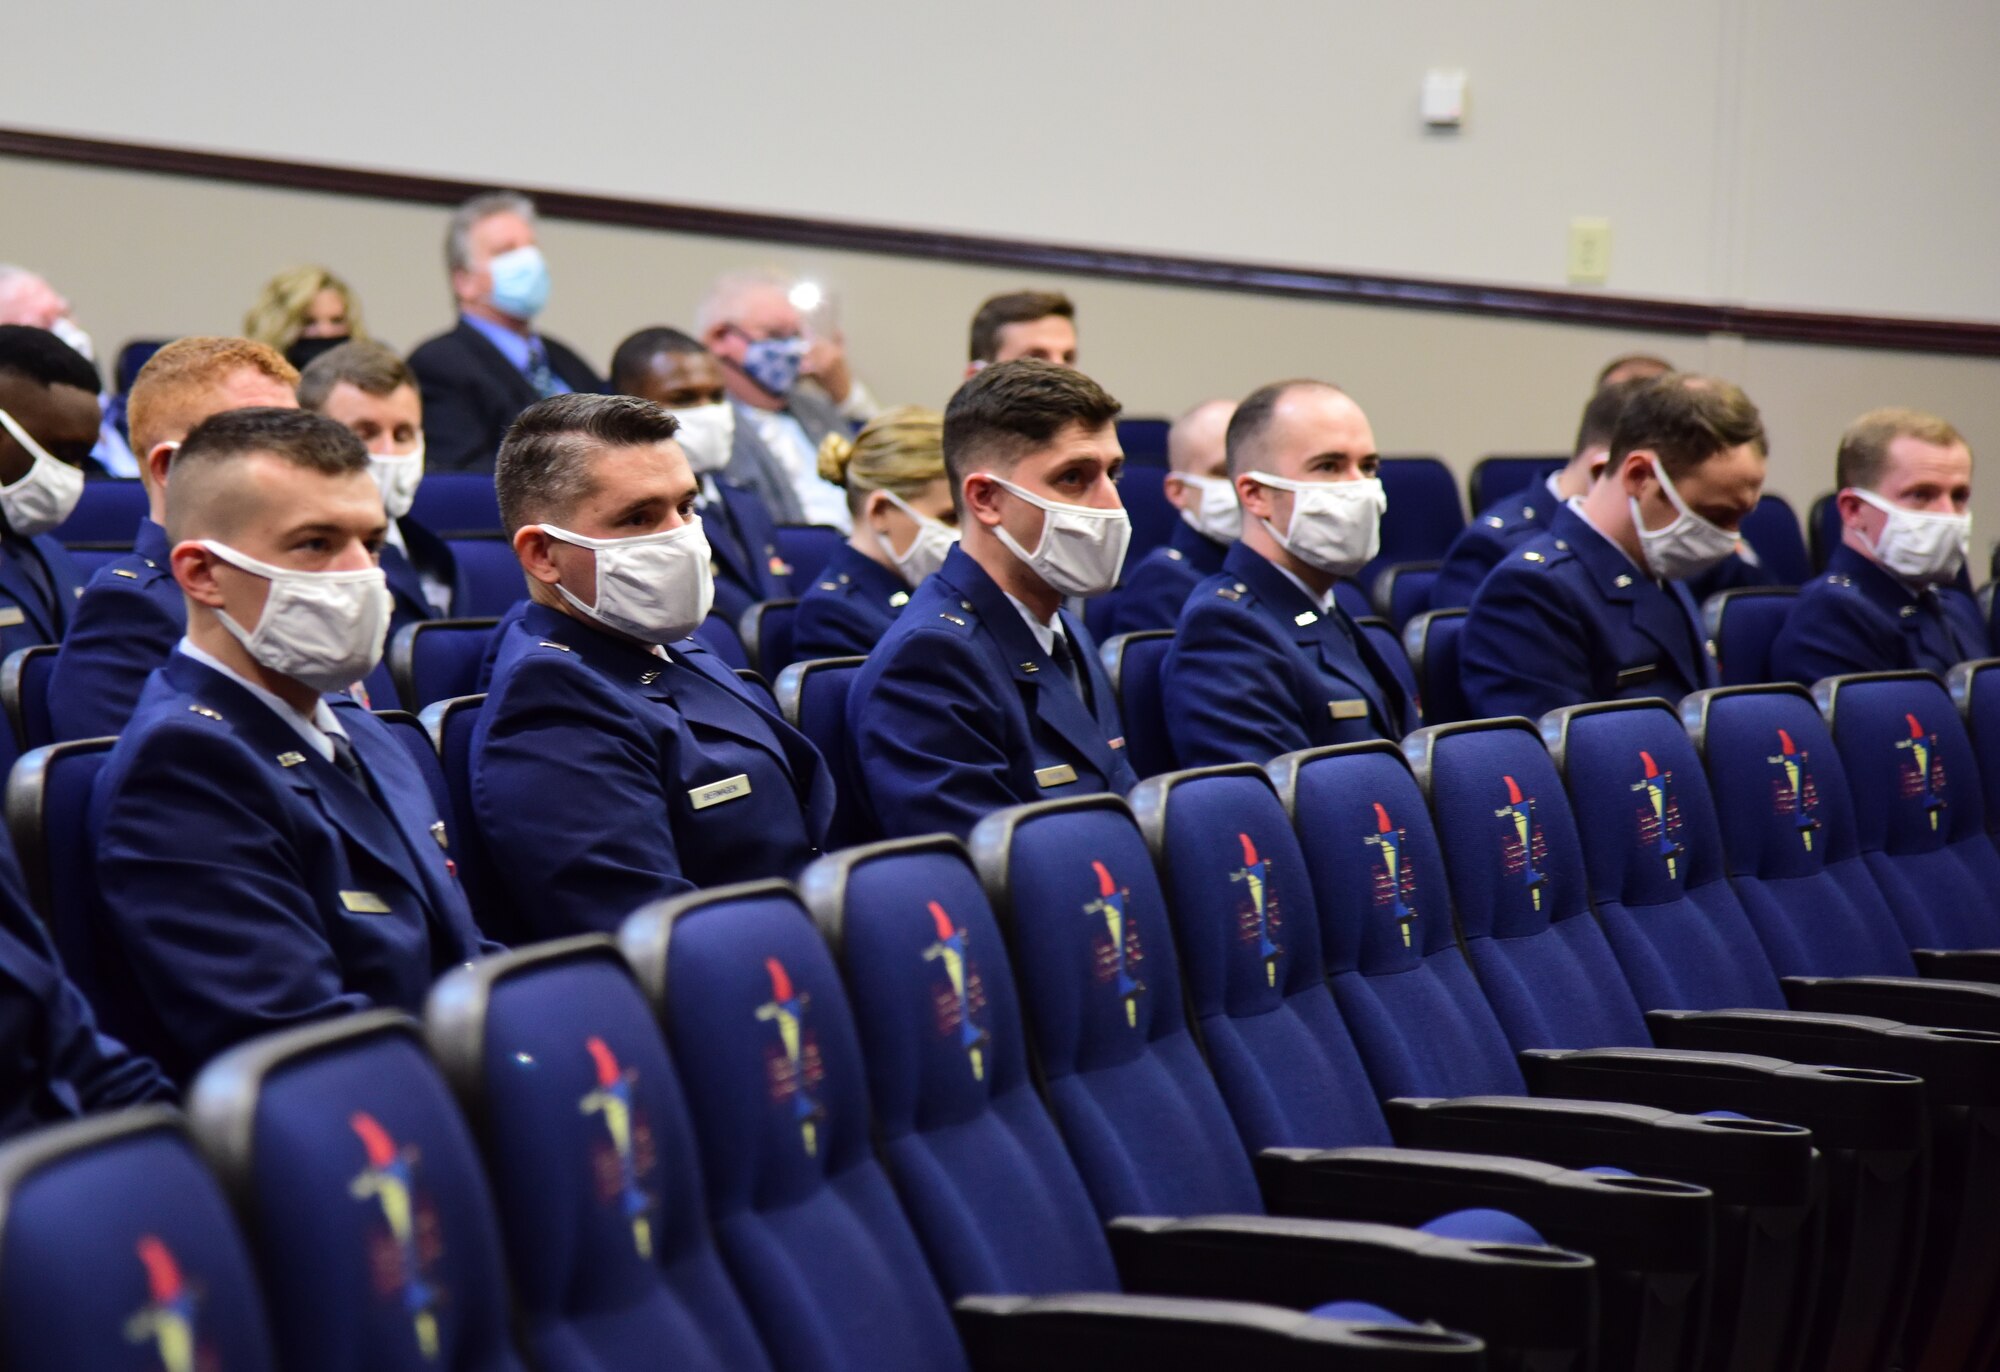 Graduates from Specialized Undergraduate Pilot Training class 22-05 sit at the graduation ceremony in the Kaye Auditorium Feb 4, 2022, on Columbus Air Force Base, Miss. Paralleling their flying training, students also need to complete around 400 hours of flight-related classroom instruction. (U.S. Air Force photo by Melissa Duncan-Doublin)